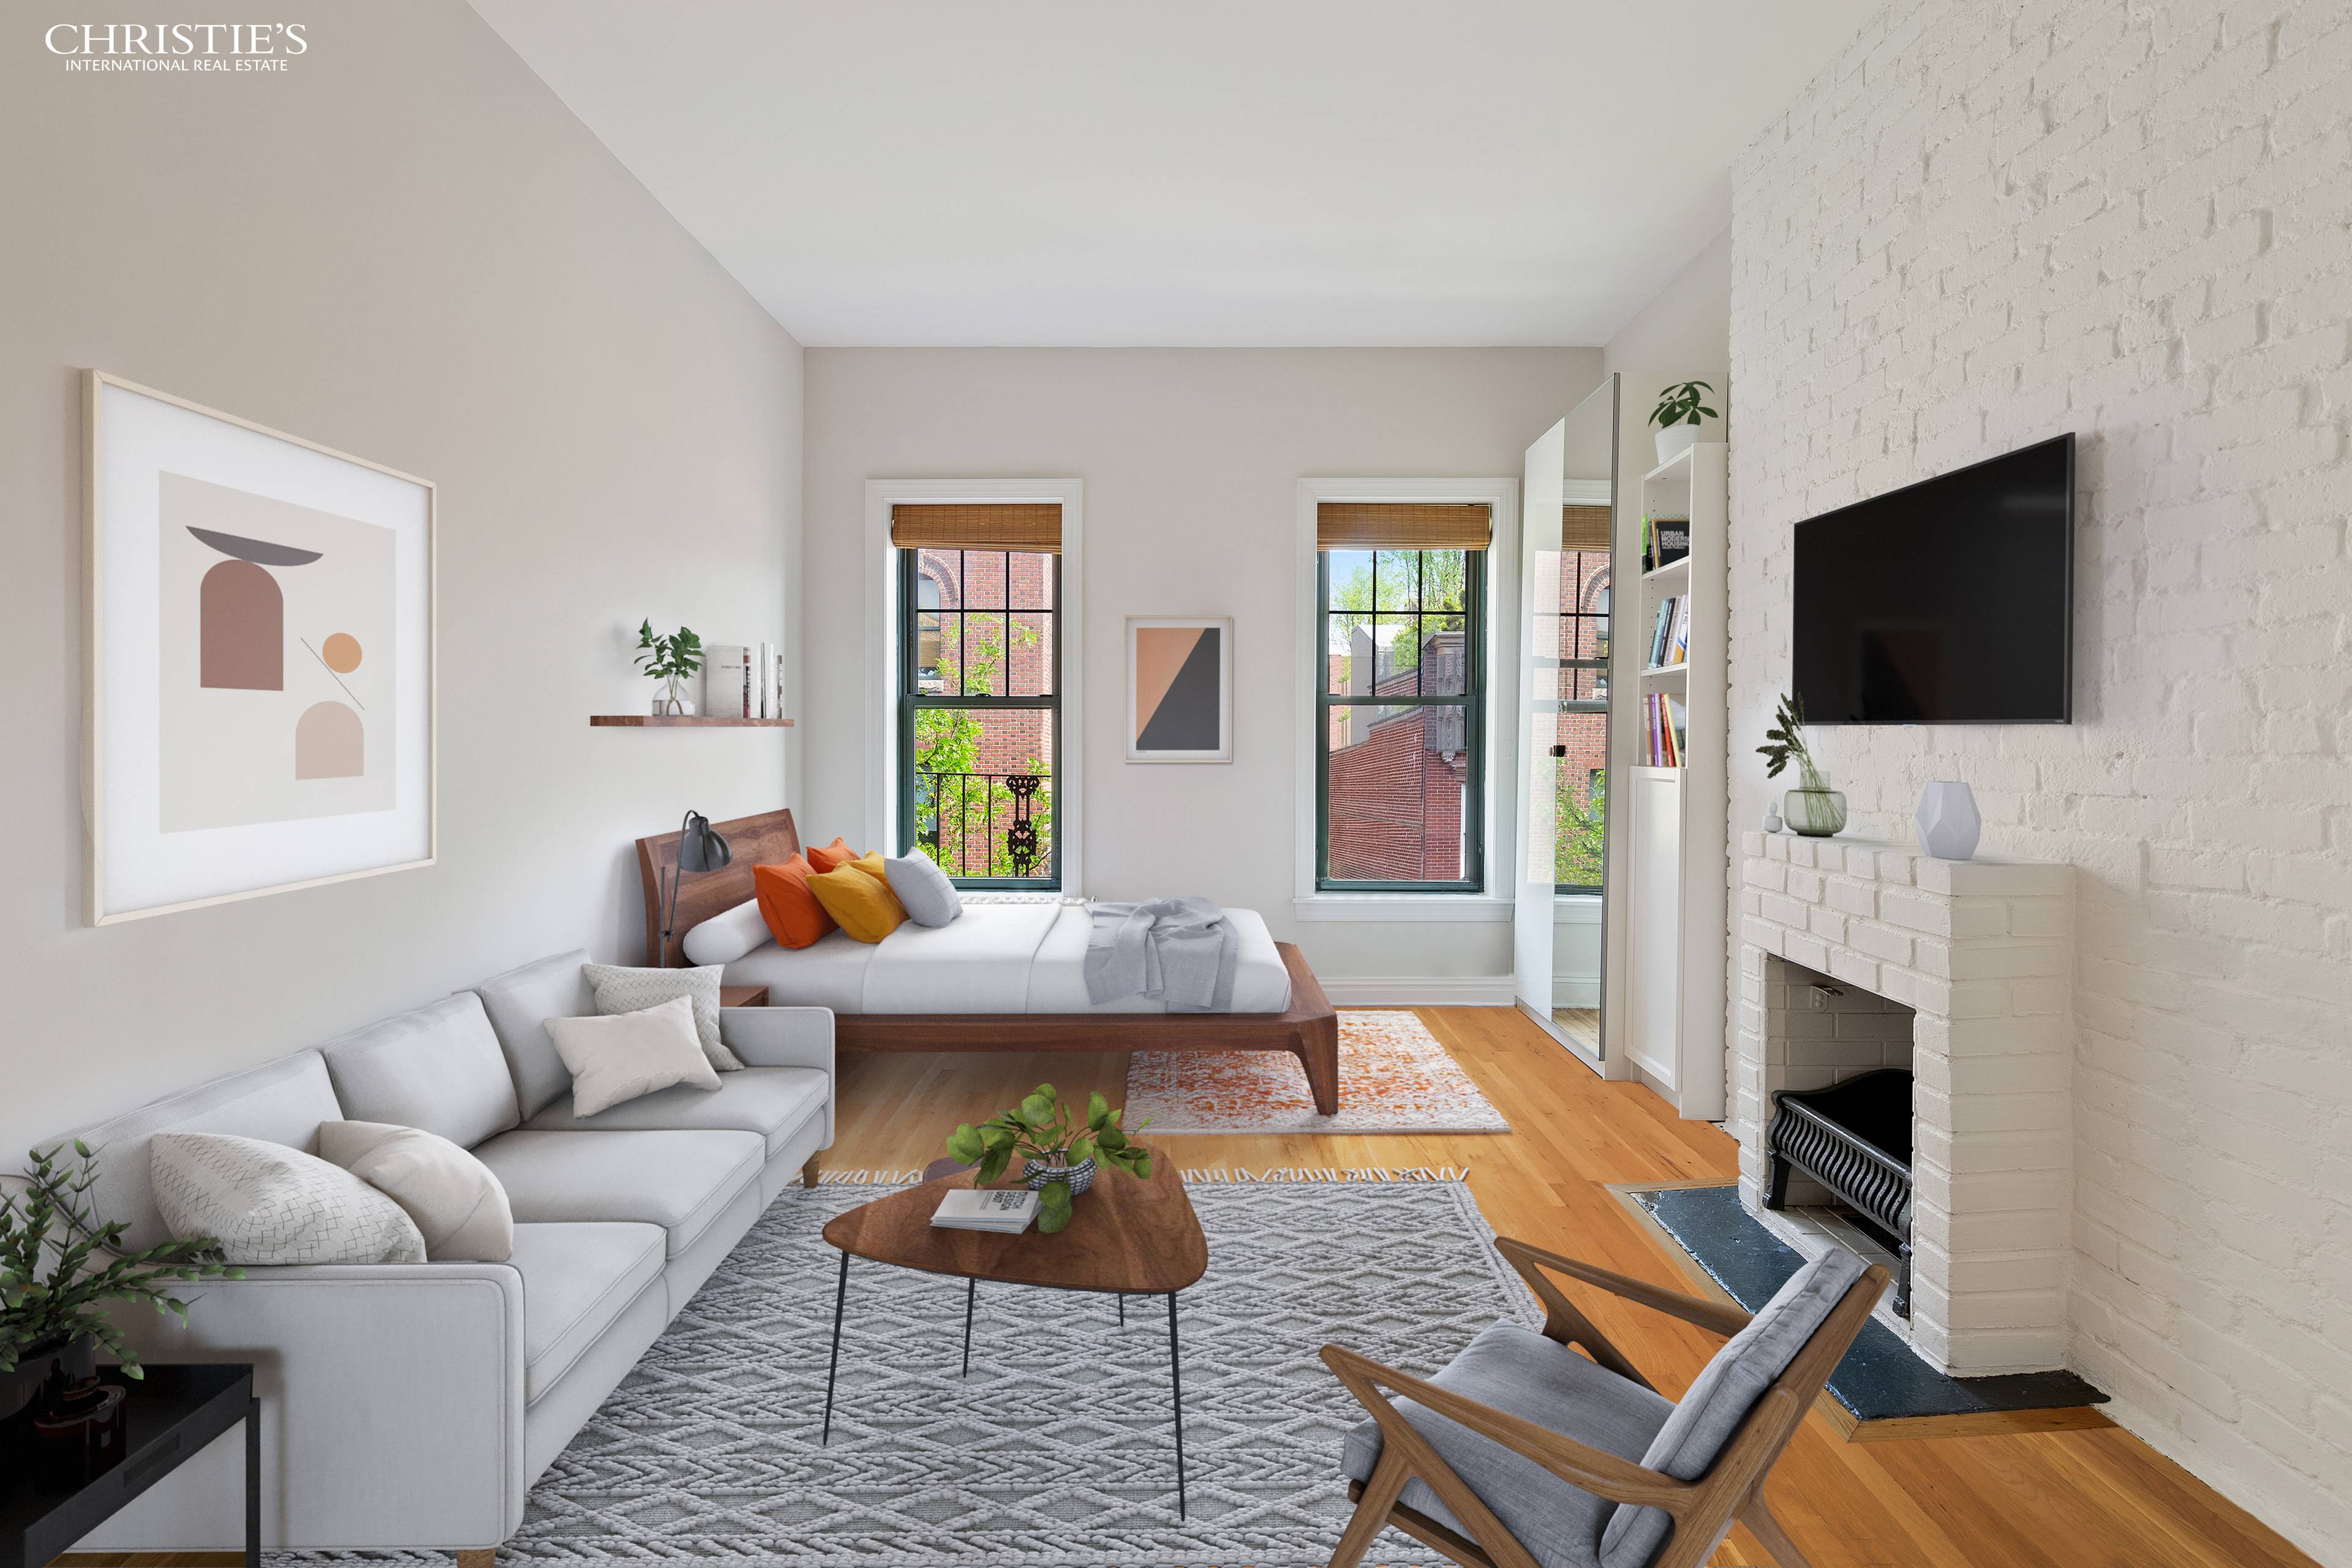 This beautifully renovated, bright and airy studio is located on one of Manhattan's most sought after blocks, just a stone's throw away from Meatpacking District and Hudson River Park.